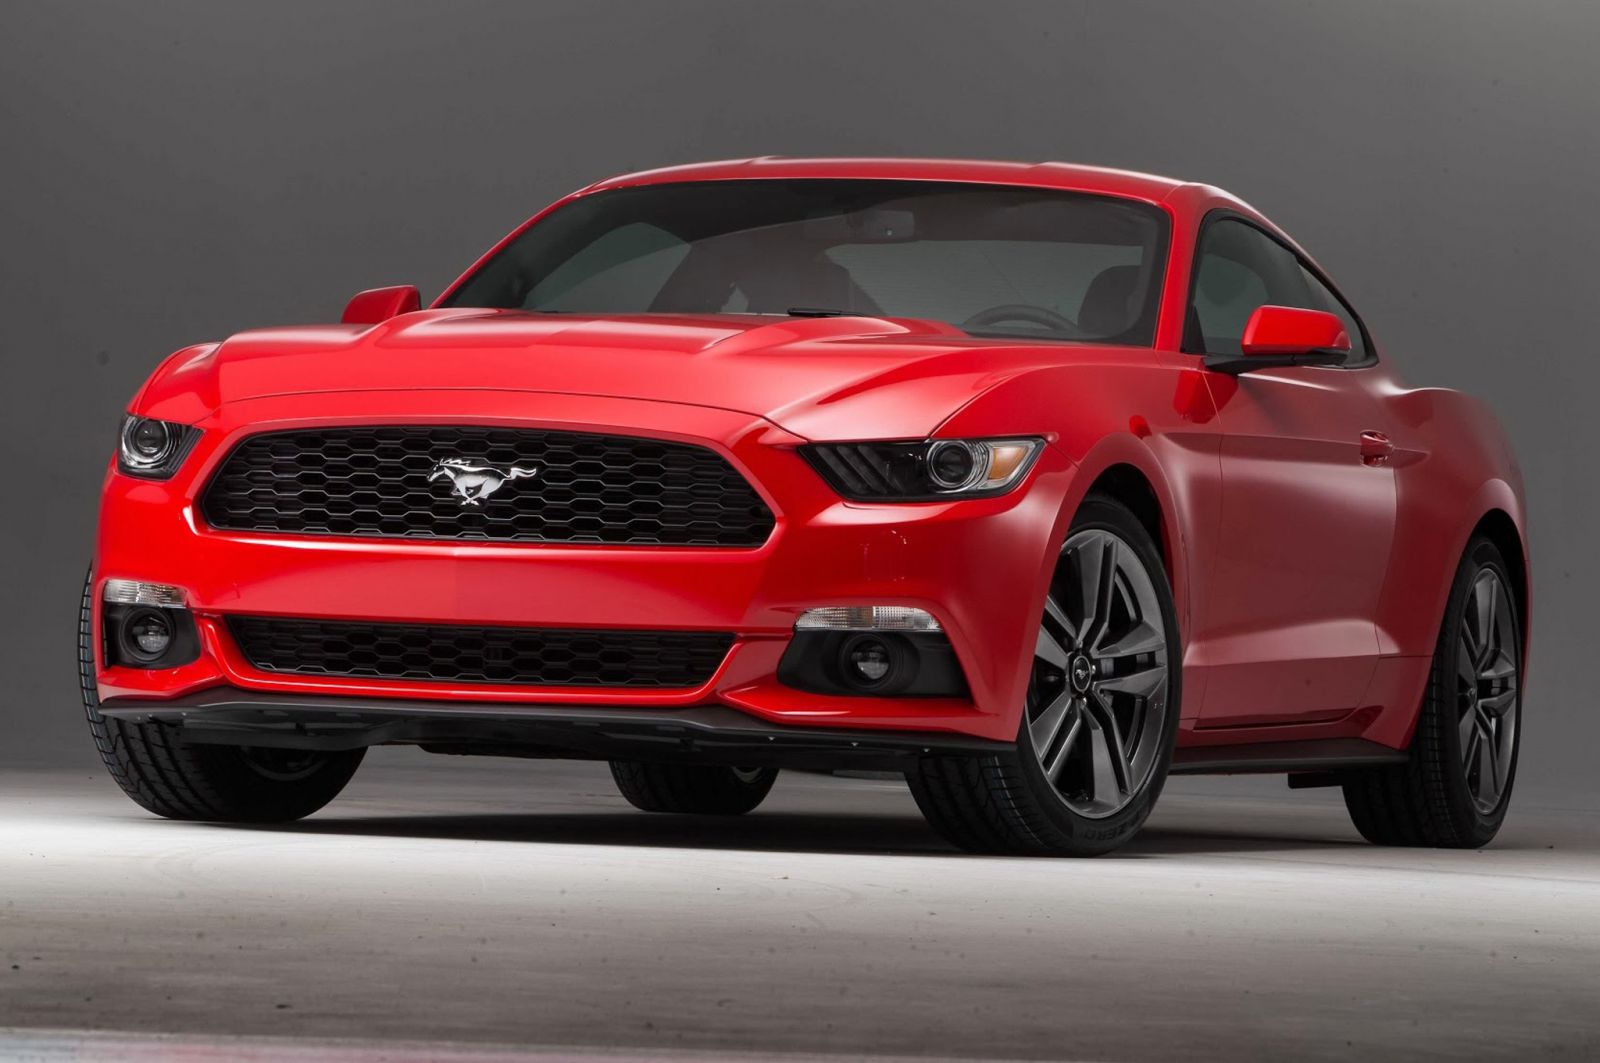 Ford Mustang best selling sports car in US